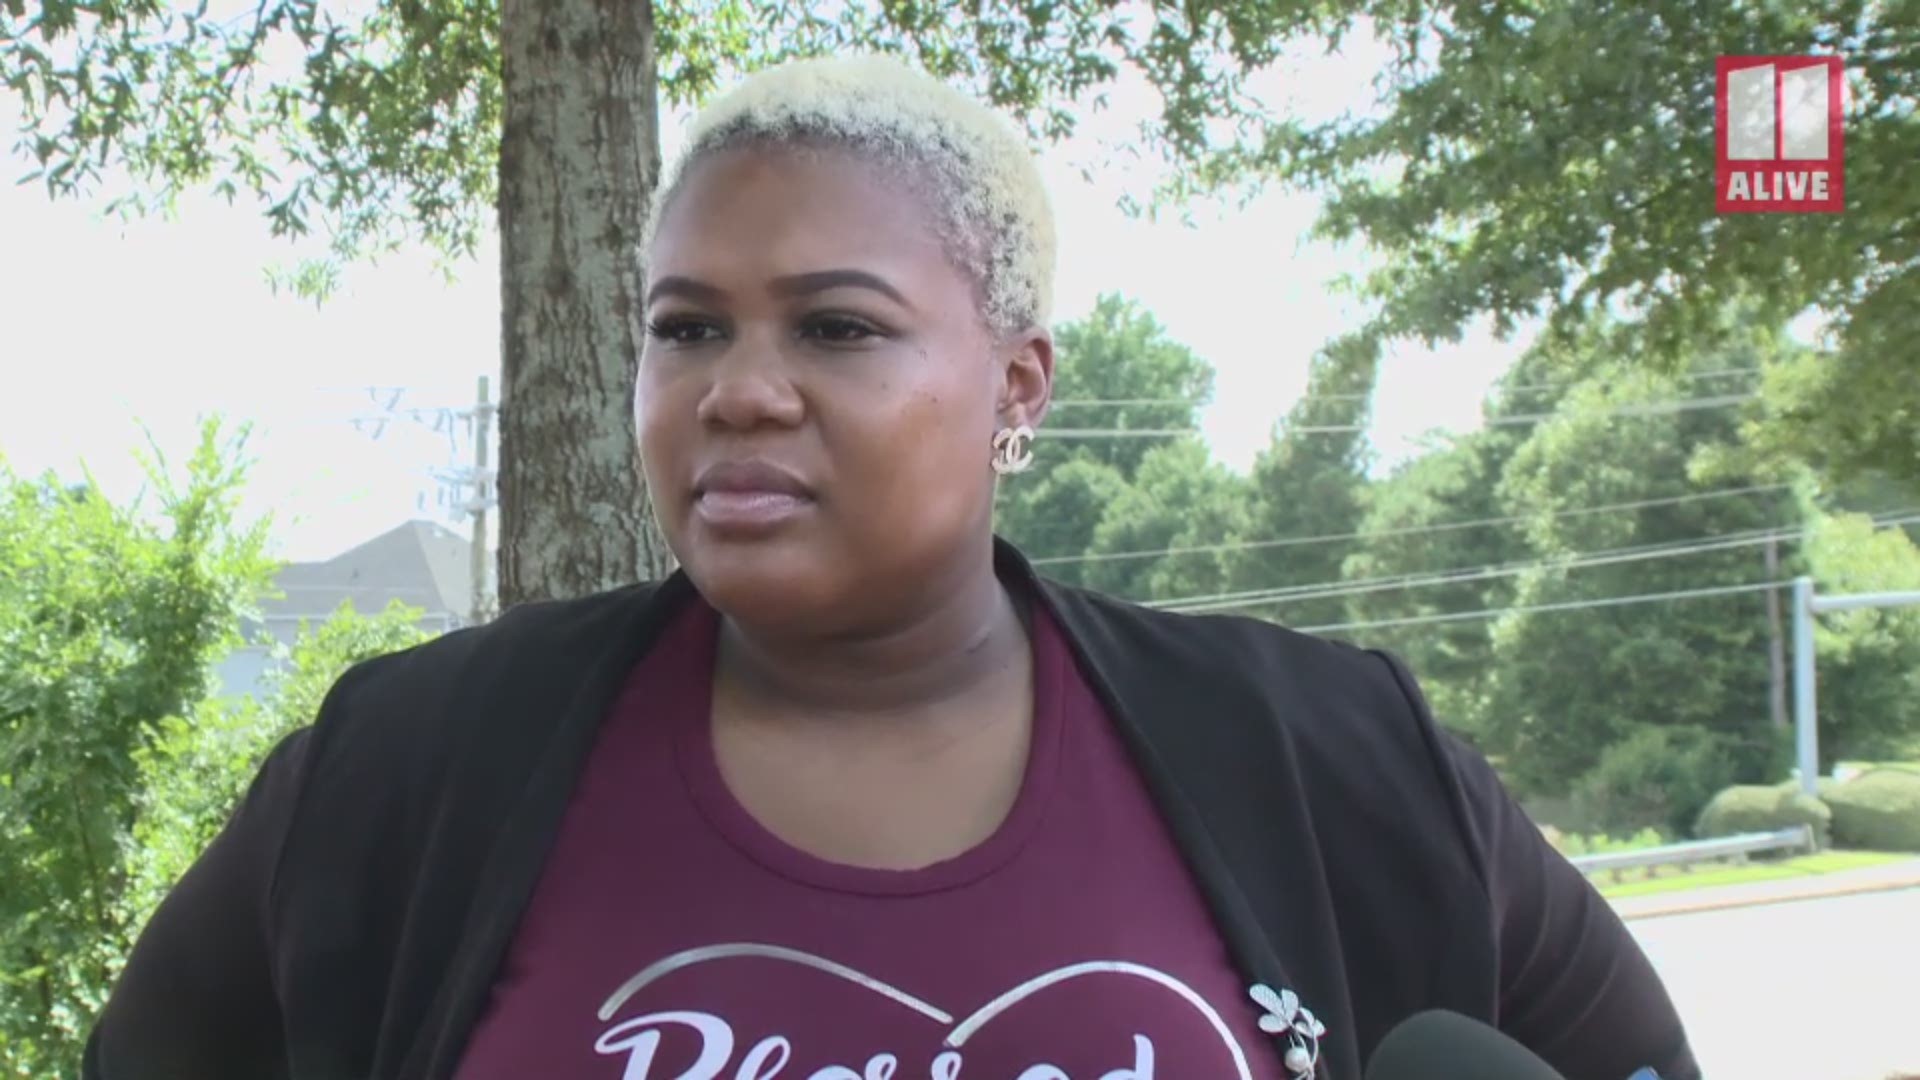 The state representative spoke to media after hearing the public statement of the man she previously accused of telling her to "go back" where she came back from.